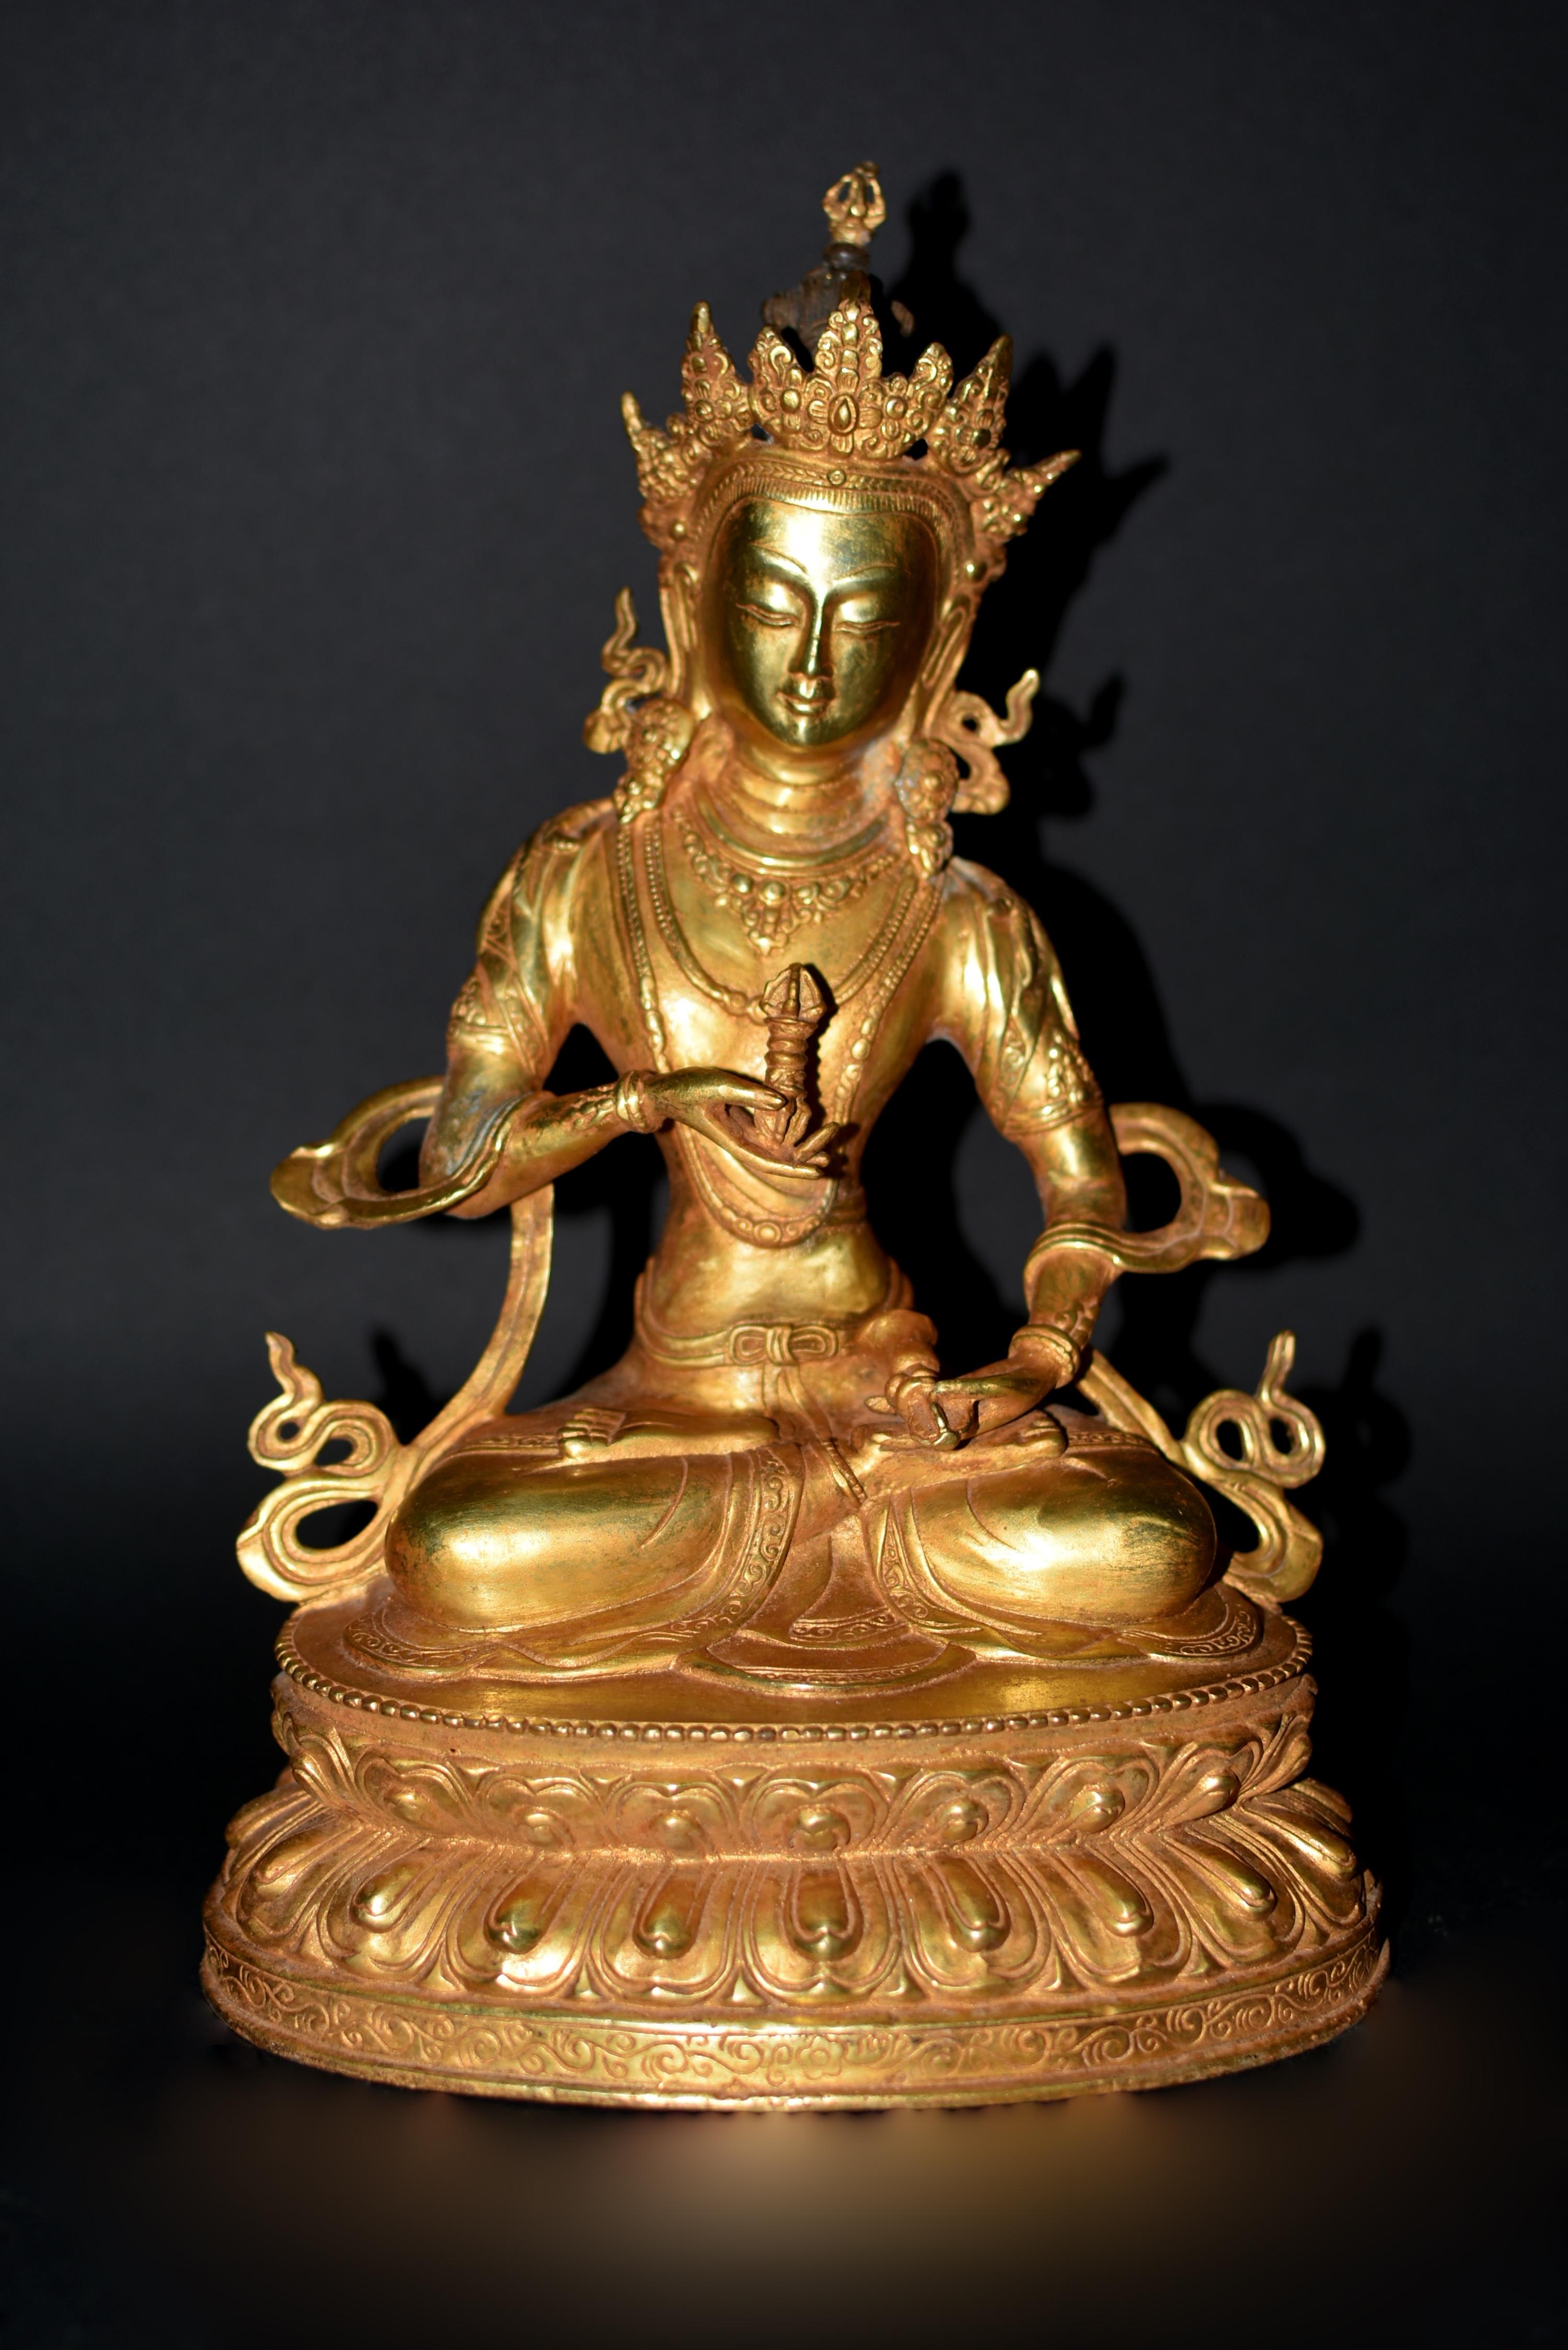 A beautiful, 4.15 lb, gilt bronze Tibetan sculpture of Buddha Vajrasattva. Seated dhyana asana on double lotus throne, in the left hand a ghanta bell, in the right hand a vajra thunderbolt, scepters of combined male and female energy to conquer